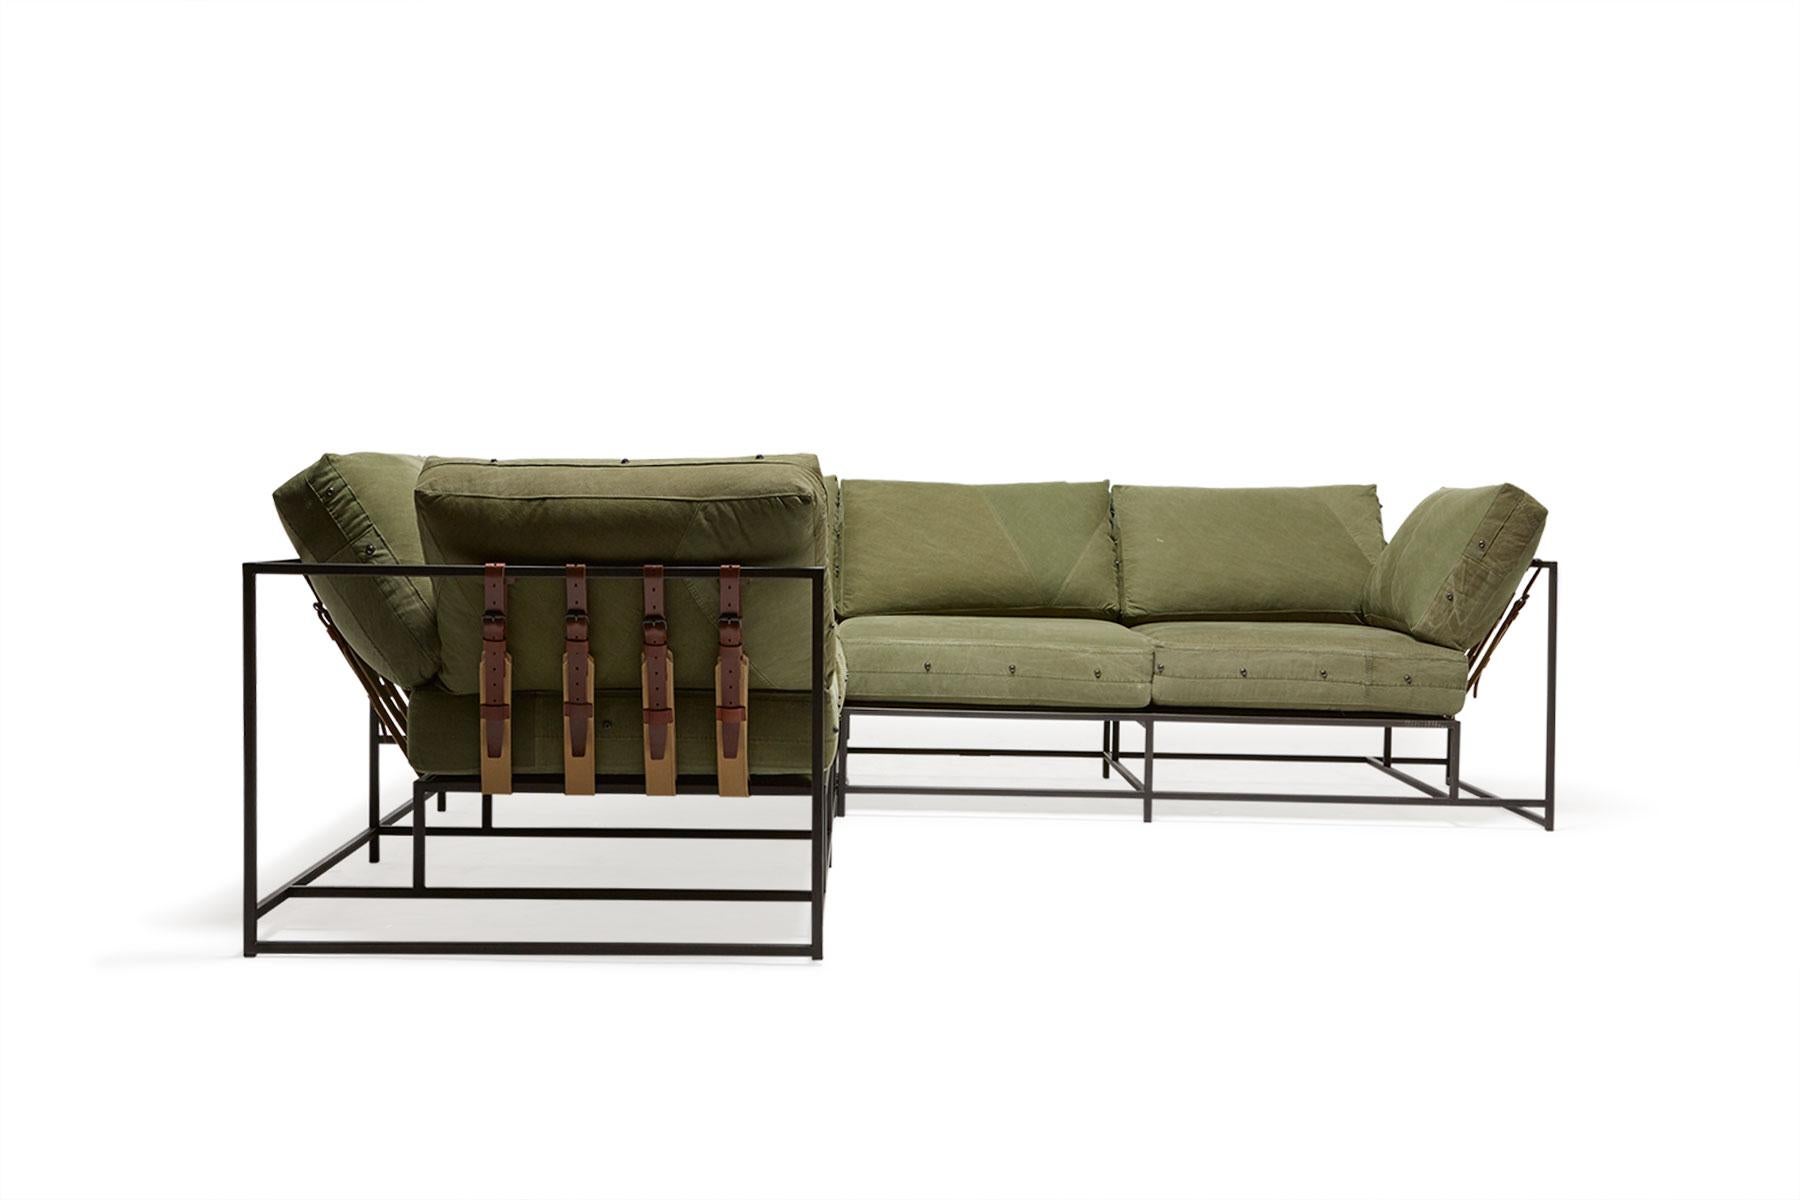 Our sectionals are great ways to customize your space and create the ultimate lounge spaces. 

Since first designing Inheritance Collection, Stephen Kenn has been inspired by the inherent history in vintage military-issue materials. Each piece of